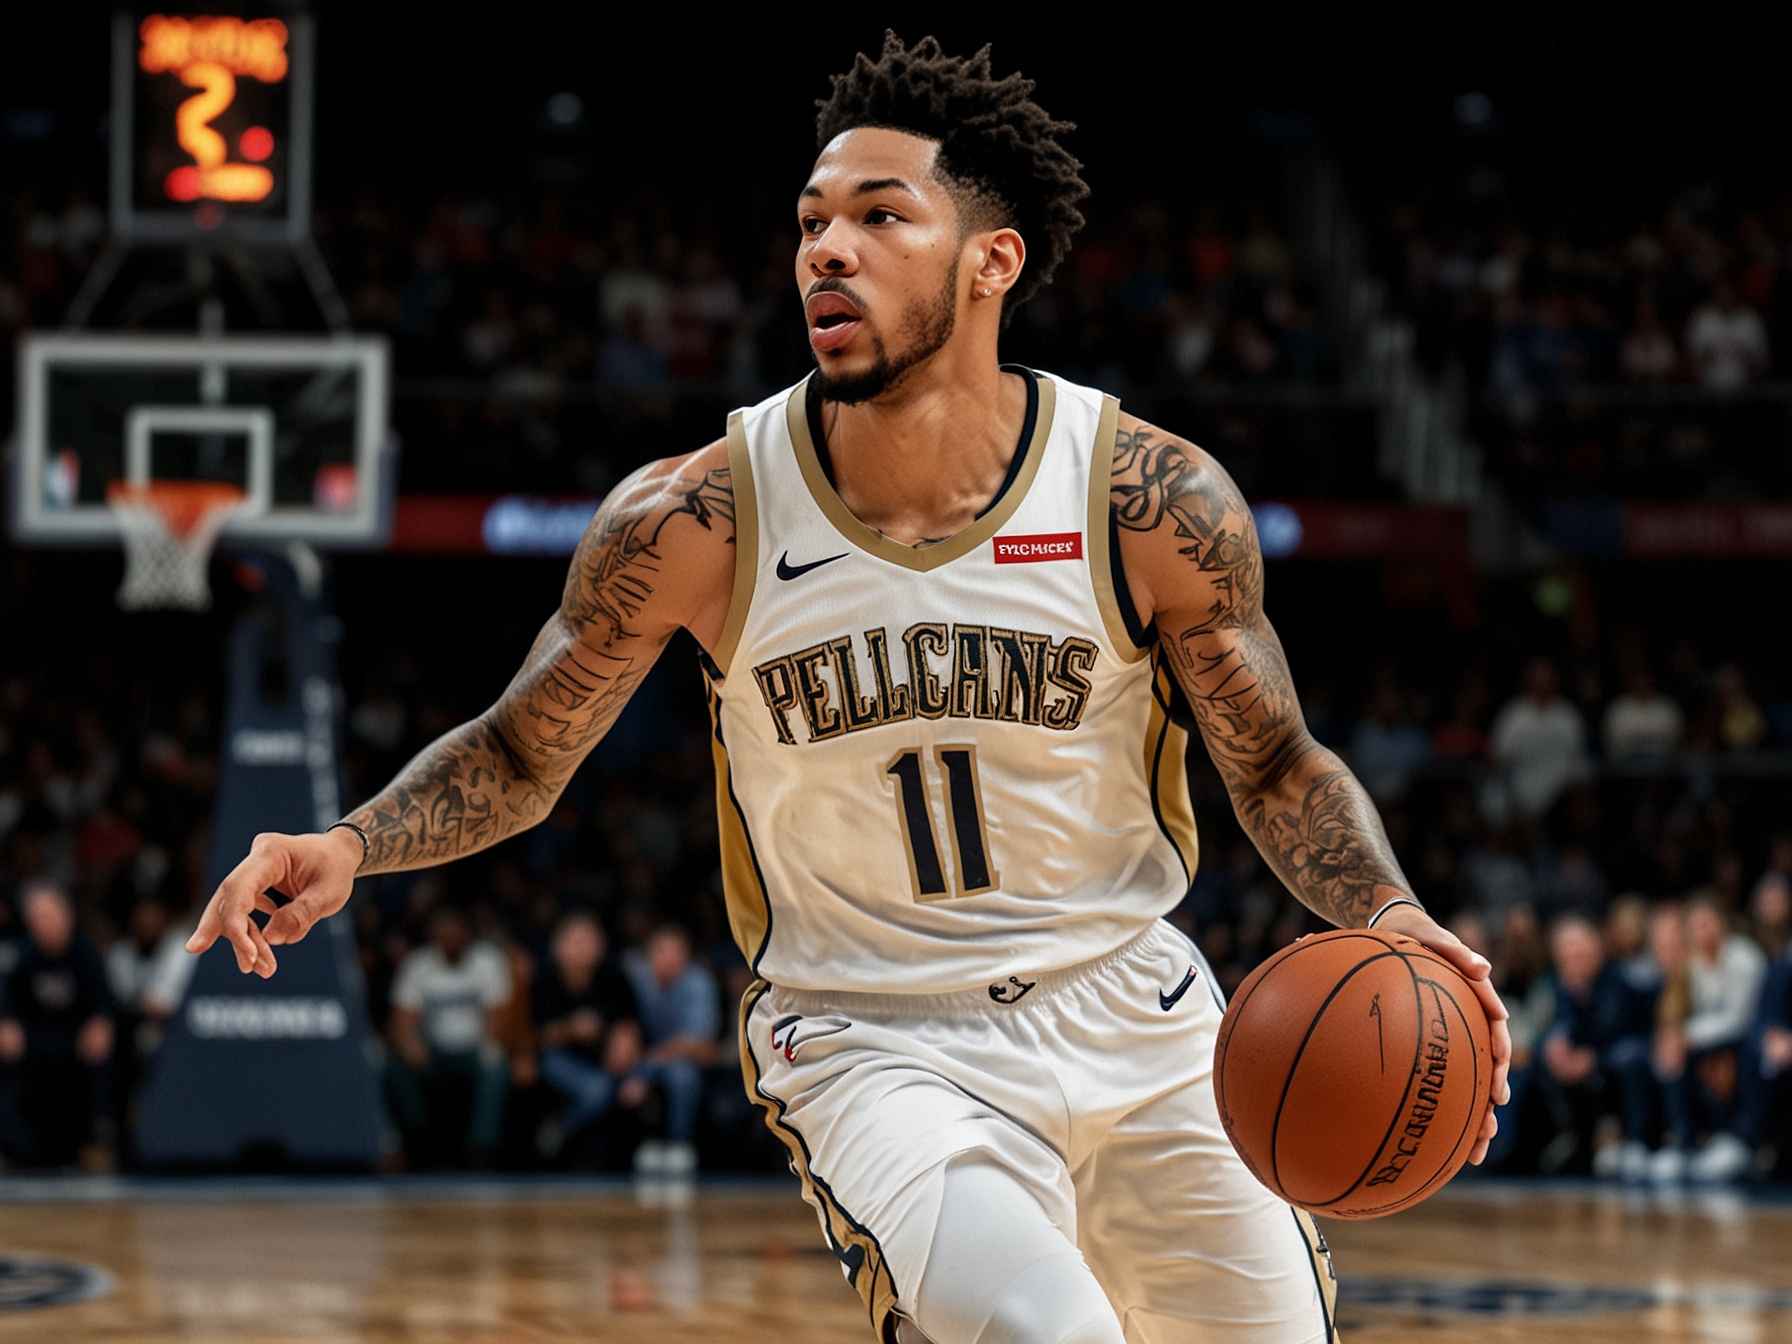 Brandon Ingram, wearing a New Orleans Pelicans jersey, confidently driving towards the basket, highlighting his offensive prowess and importance to the team's strategy.